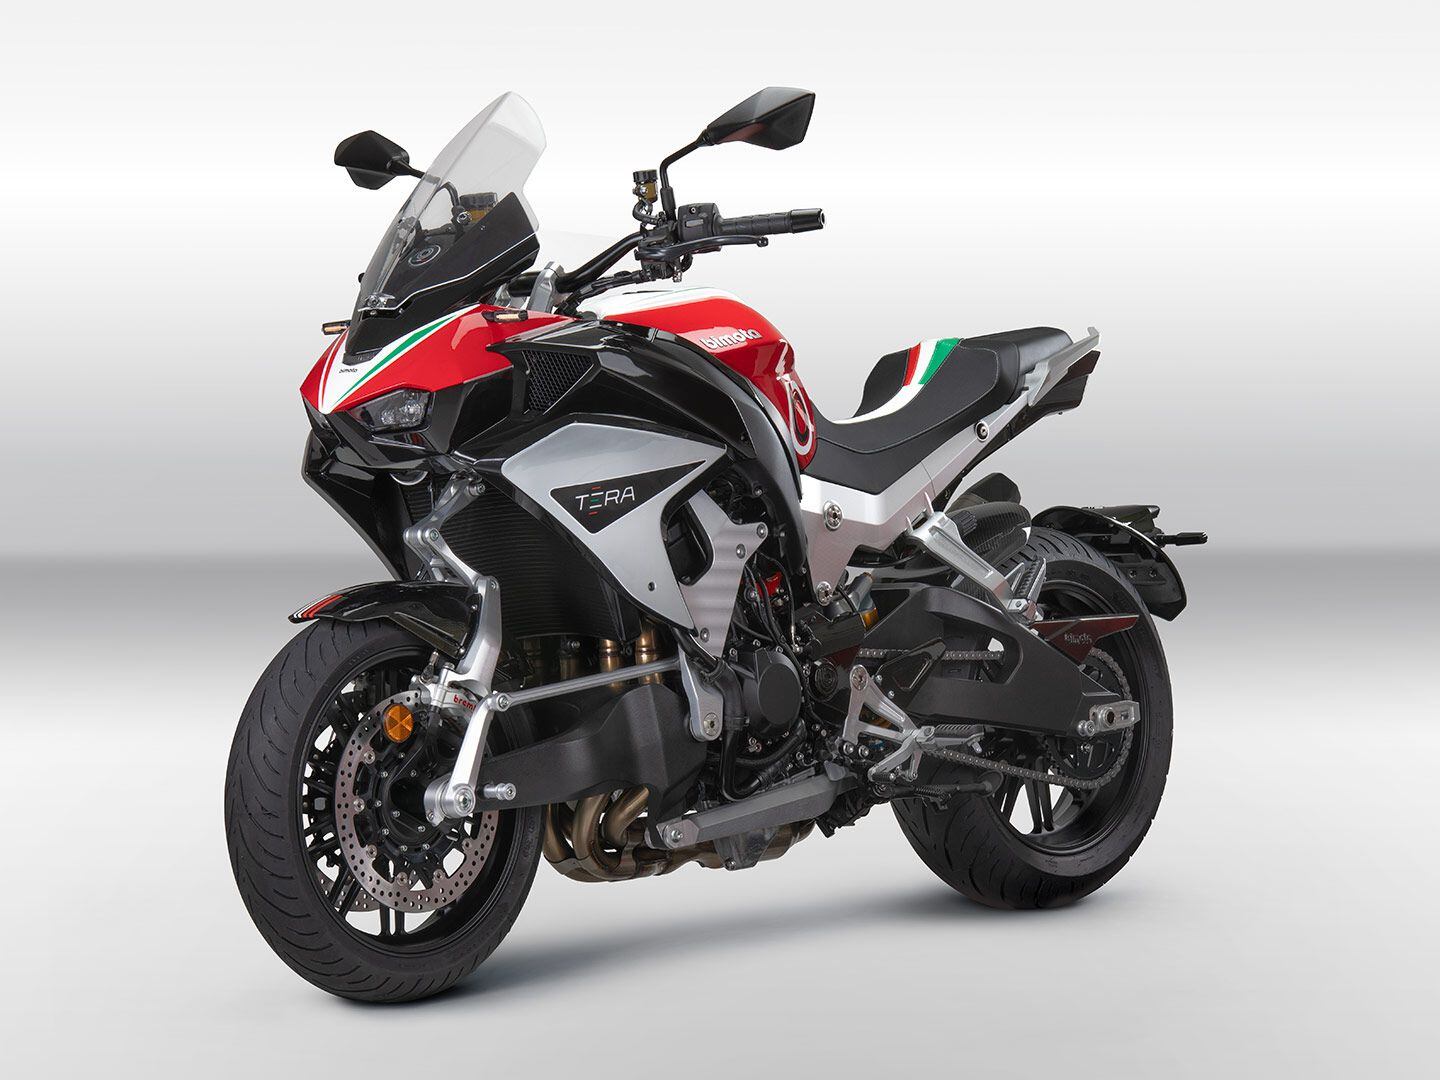 Bimota’s brand-new Tera was quietly revealed at the EICMA show on display in parent company Kawasaki’s booth.